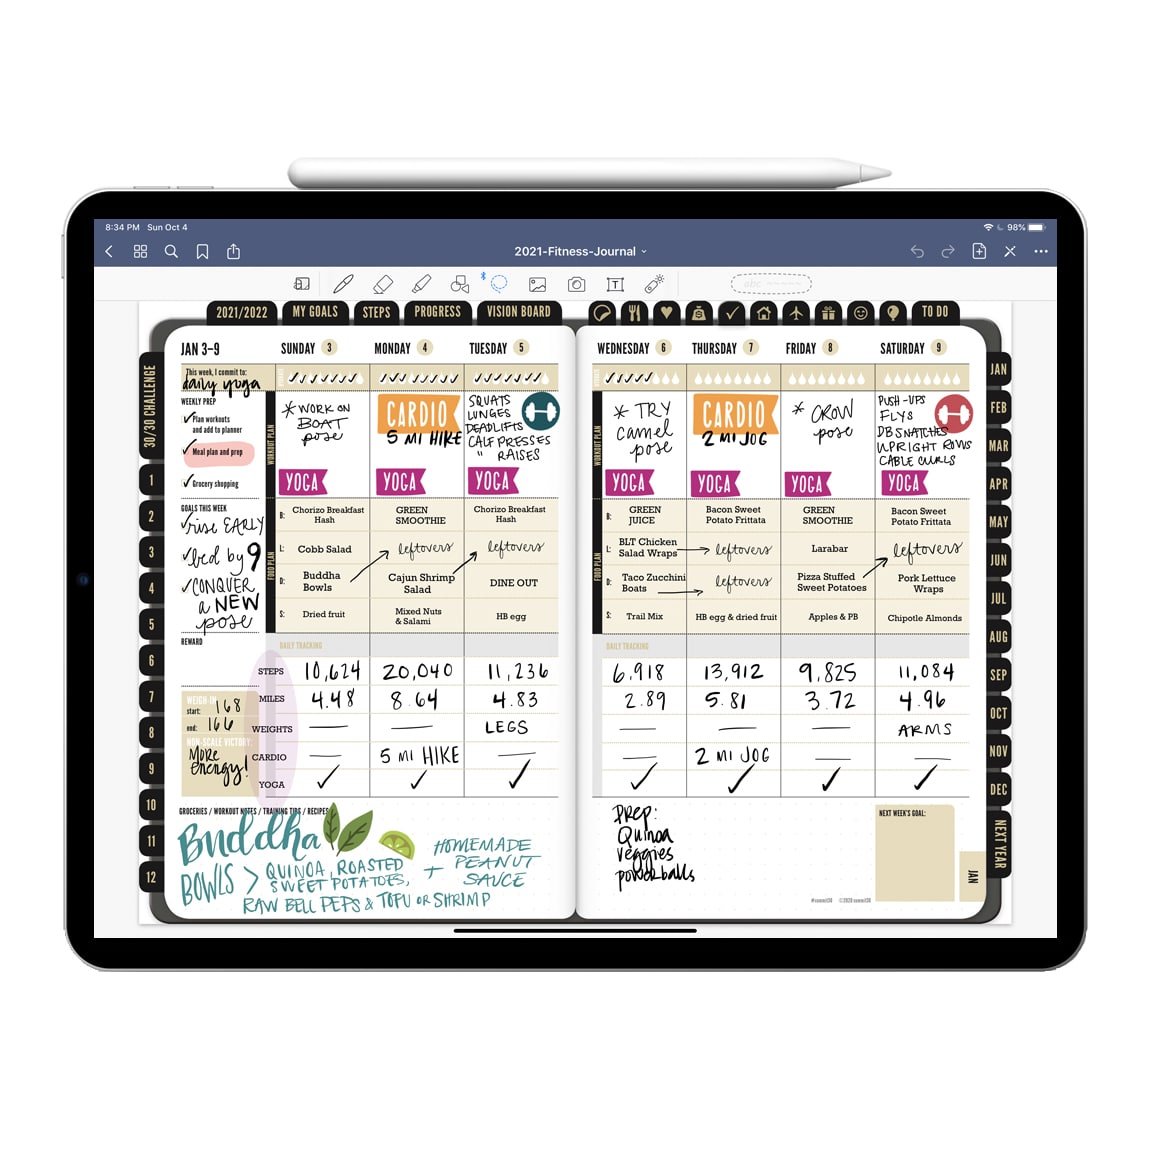 2023 Digital Fitness Journal weekly layout